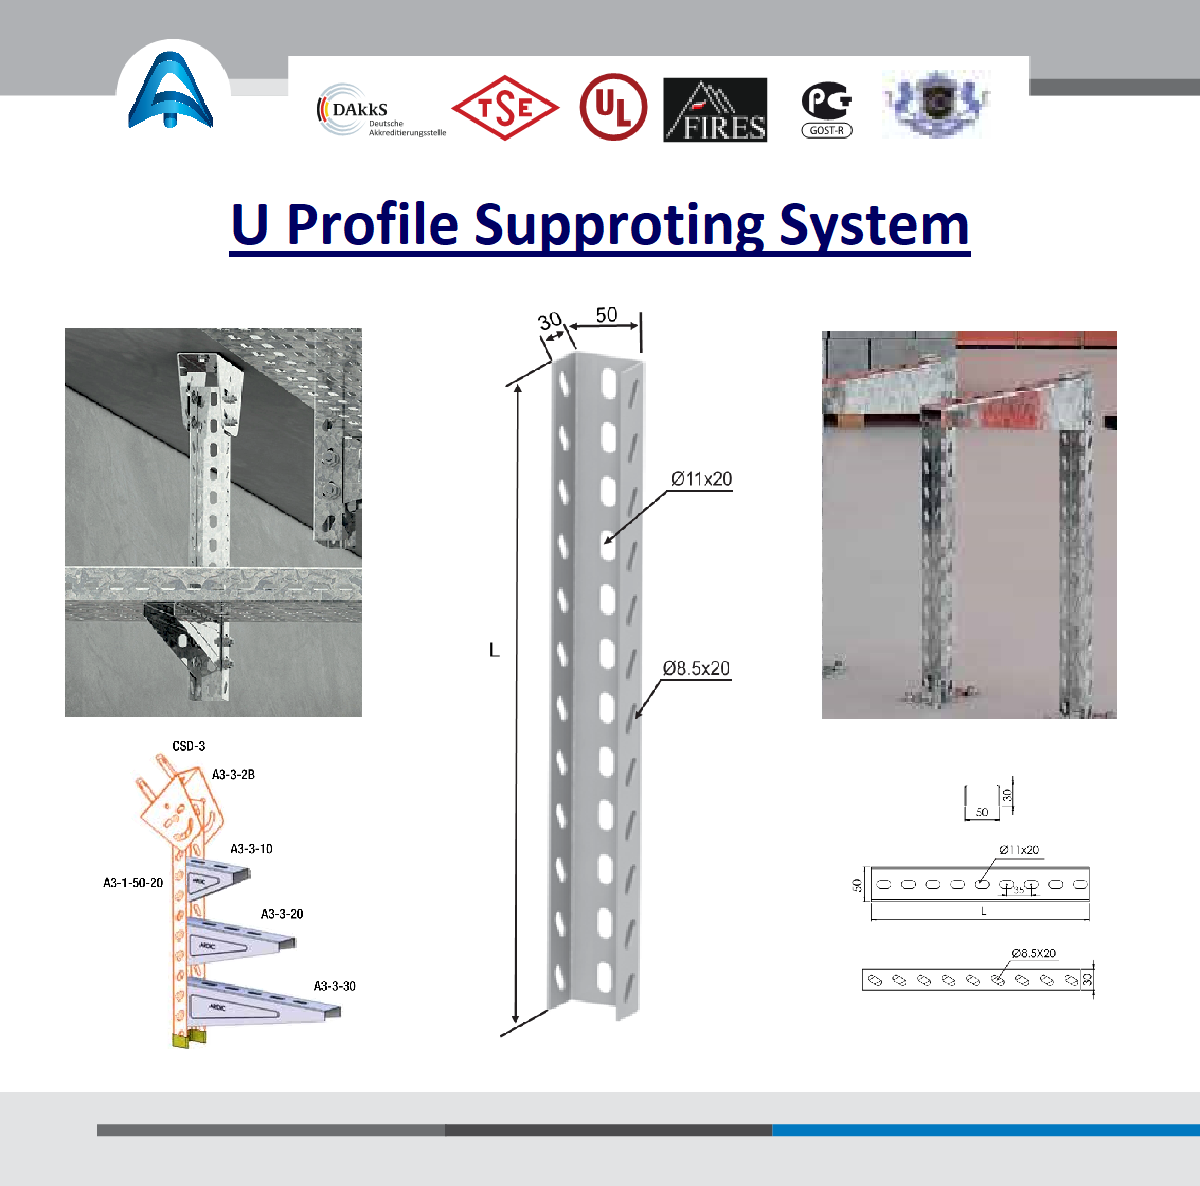 U Profile Supporting System